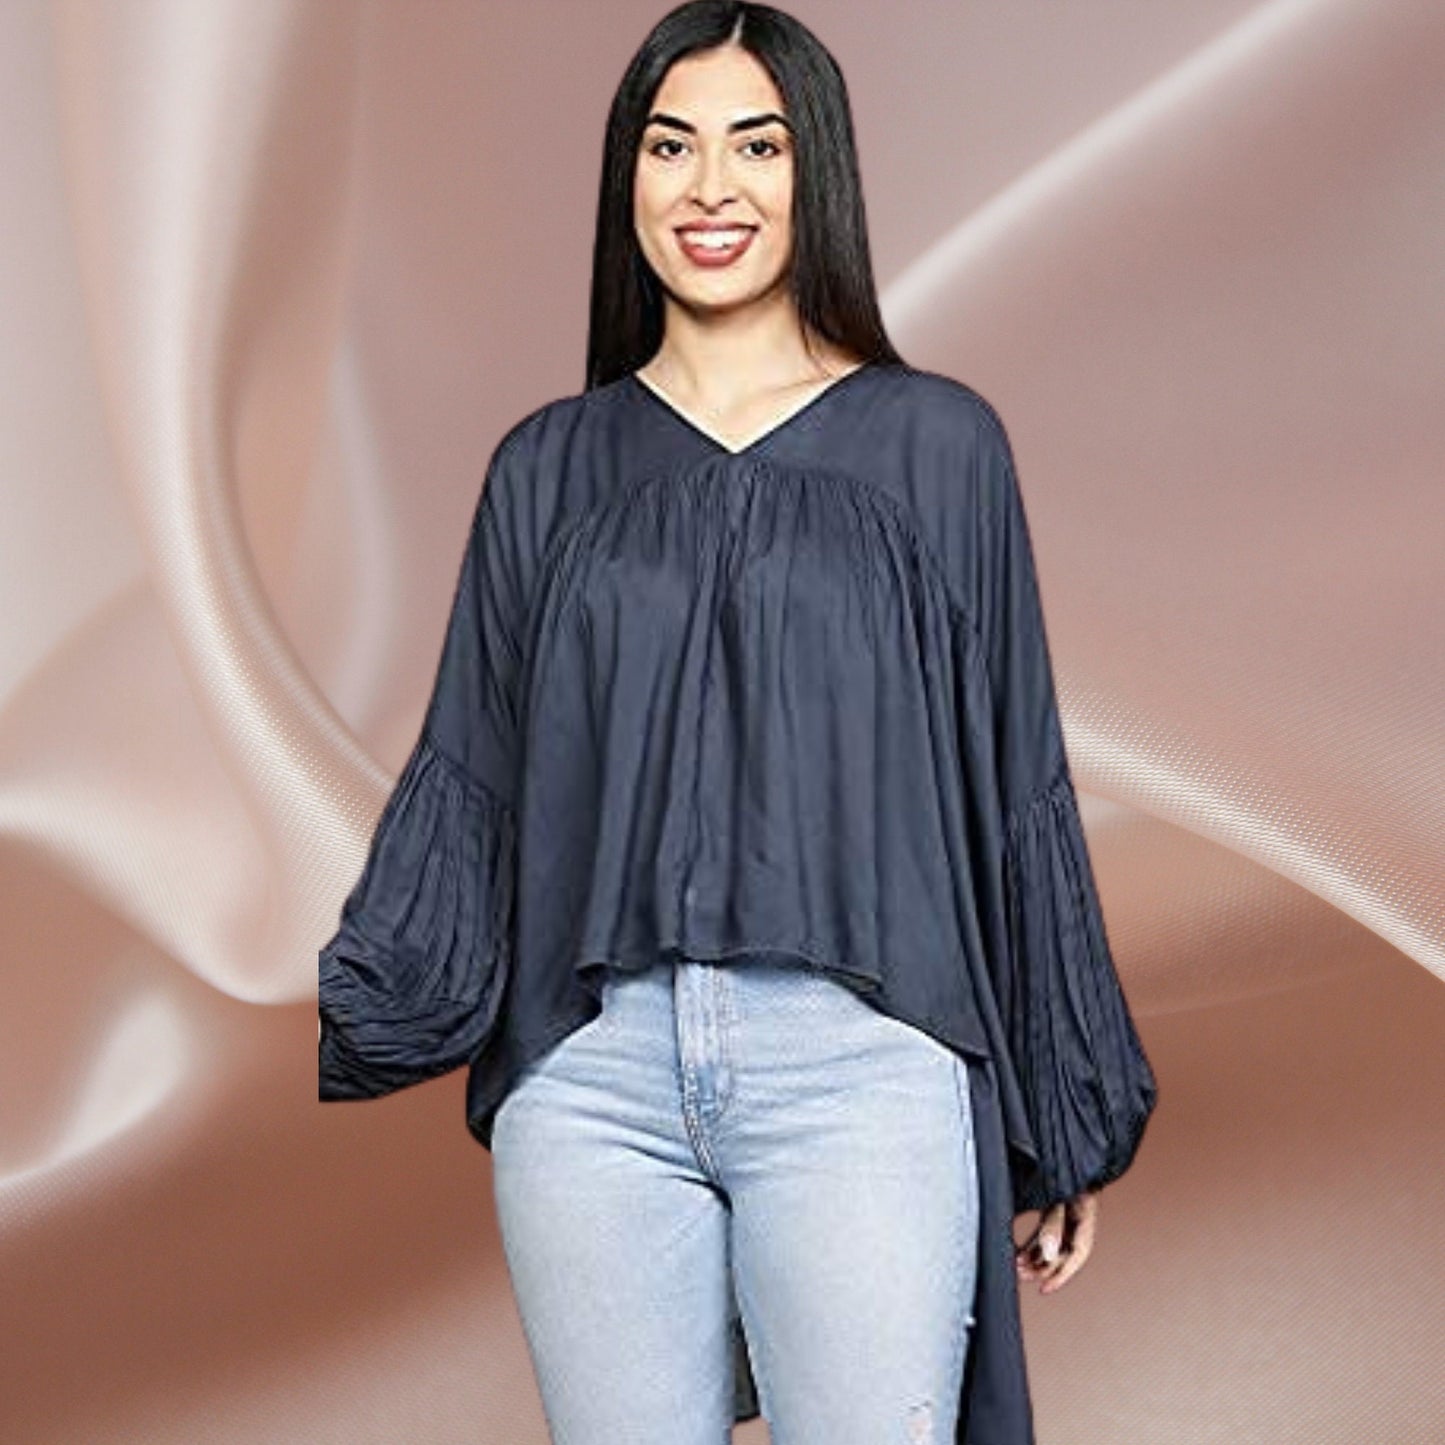 women_blue_top  women's_top  women's_cotton_top  Top_for_Women  stylish_blouse  spring_summer_top  over_sized_top  one_size_top  long_puff_sleeves  gathers_top  designer_top  cotton_viscose_top  cotton_tops  comfortable_top  Casual_women's_Top  Blue_top